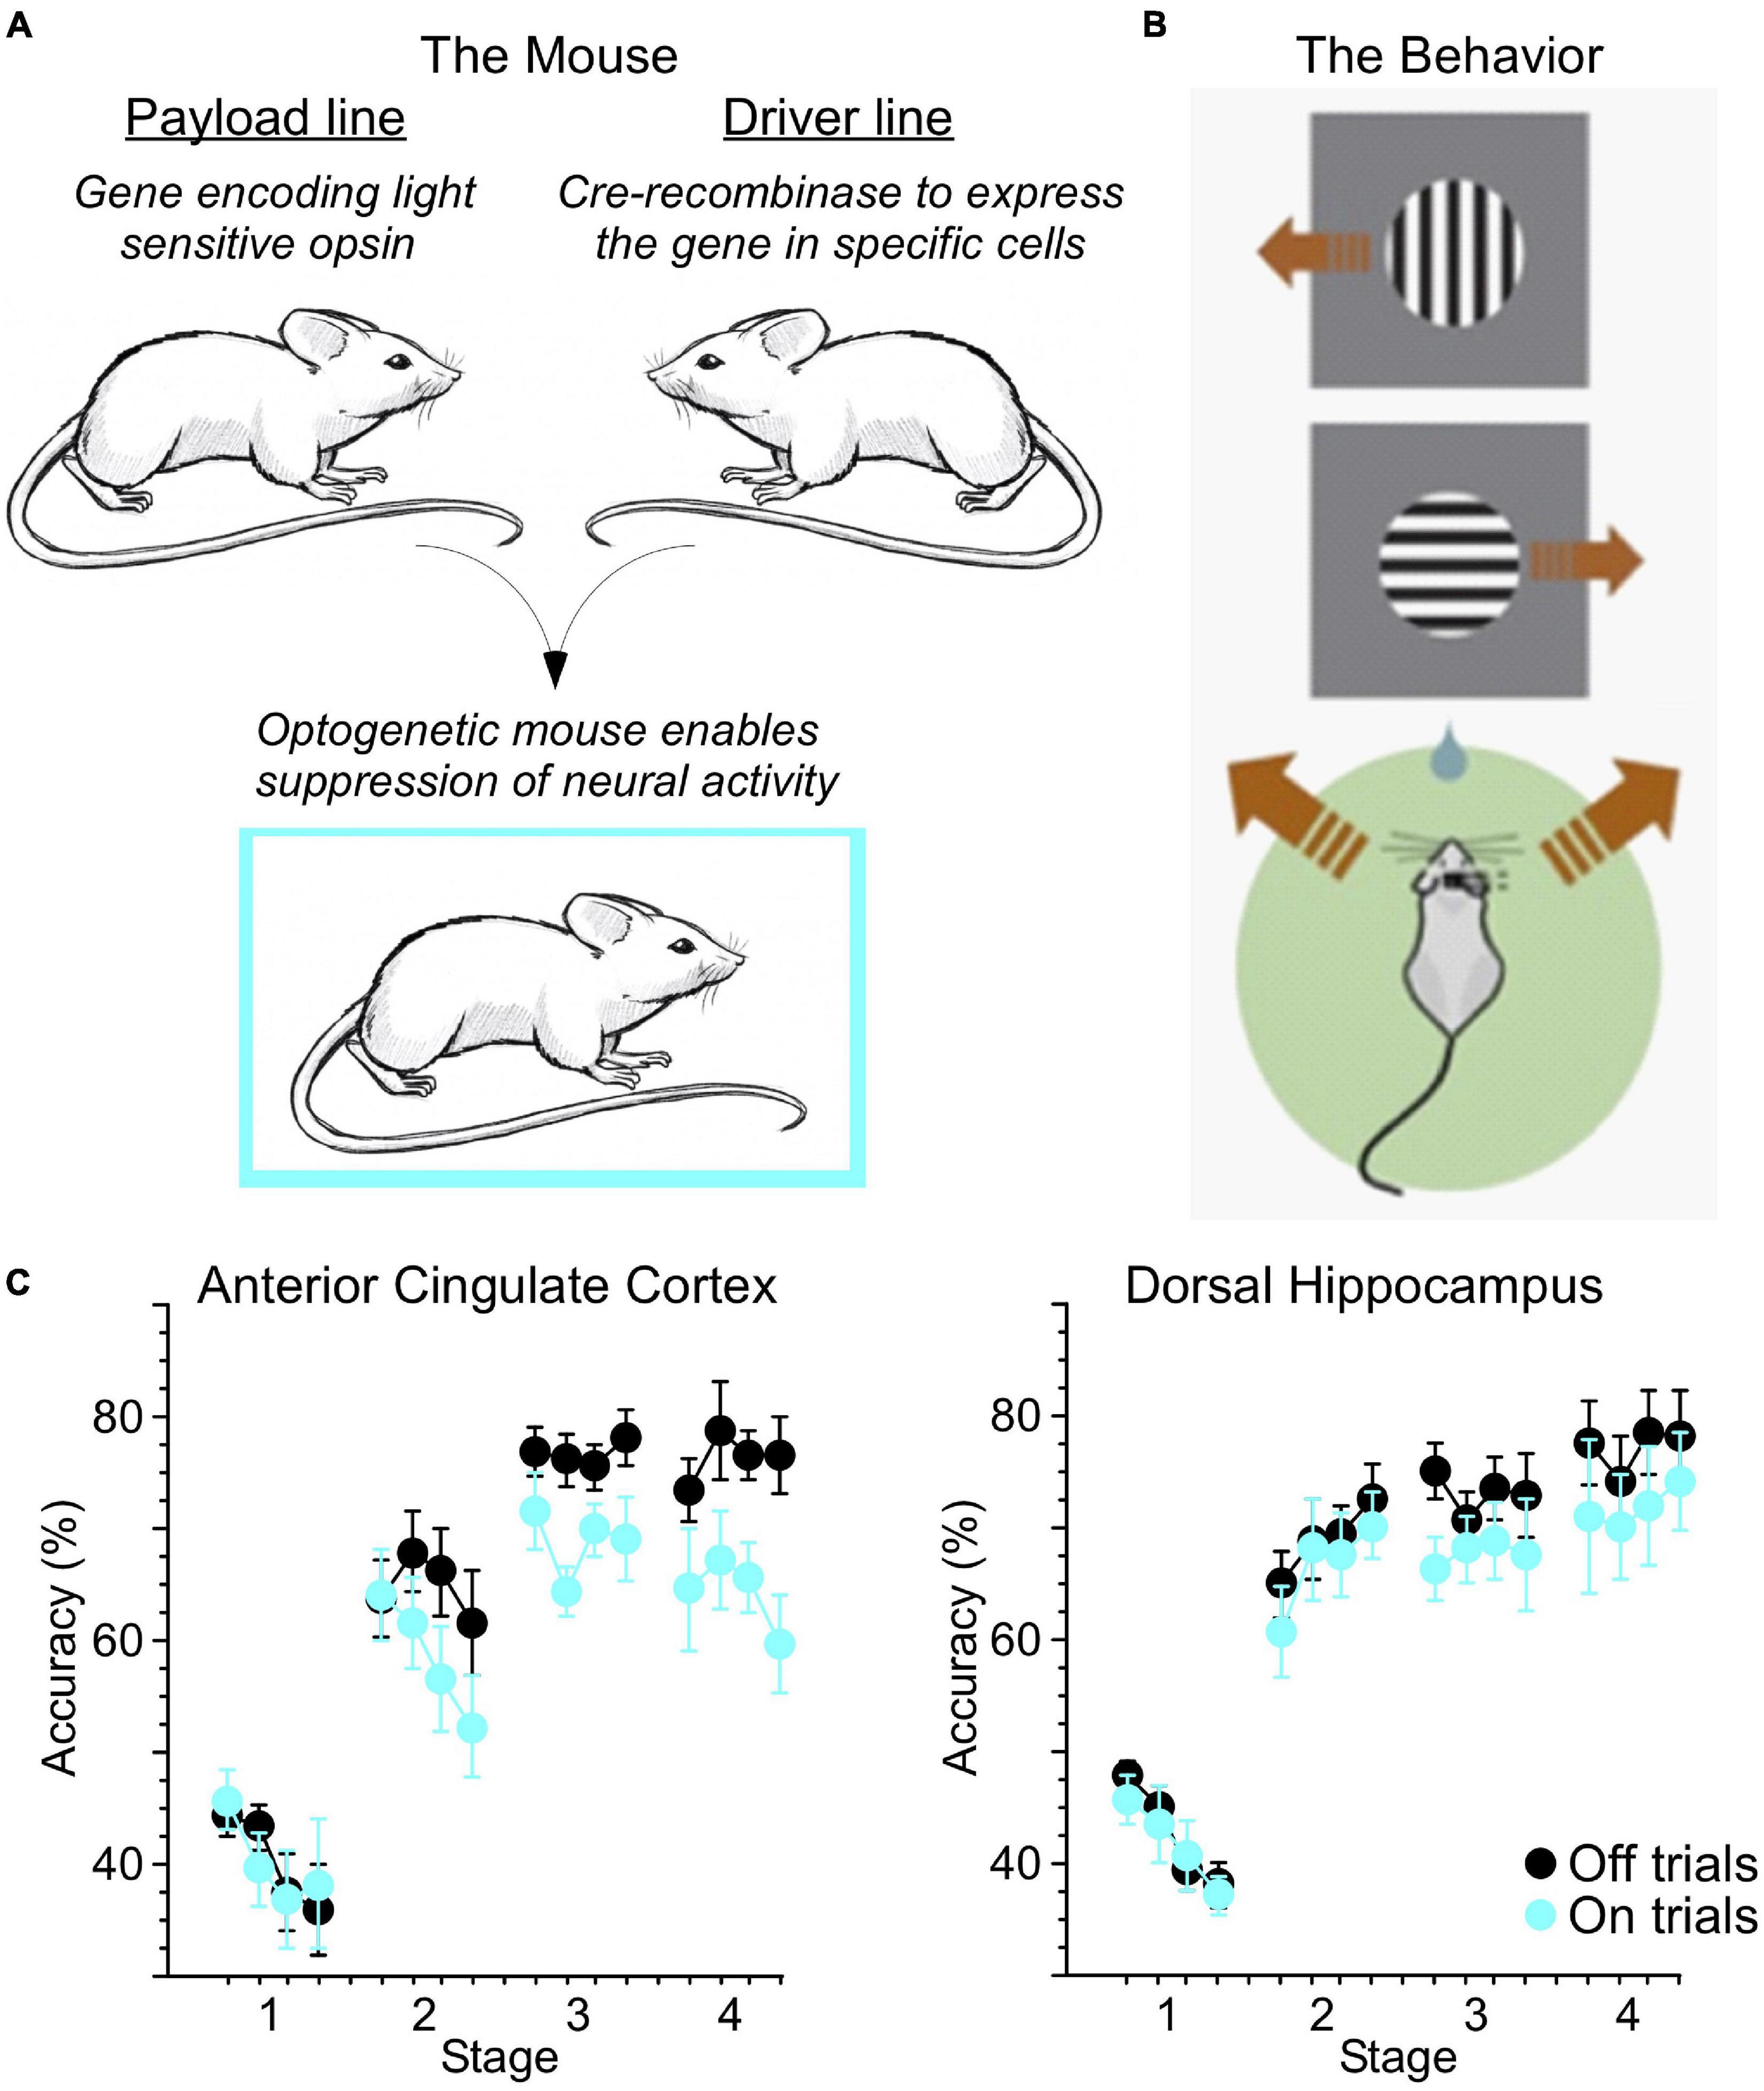 Frontiers | Decision Making as a Learned Skill in Mice and Humans